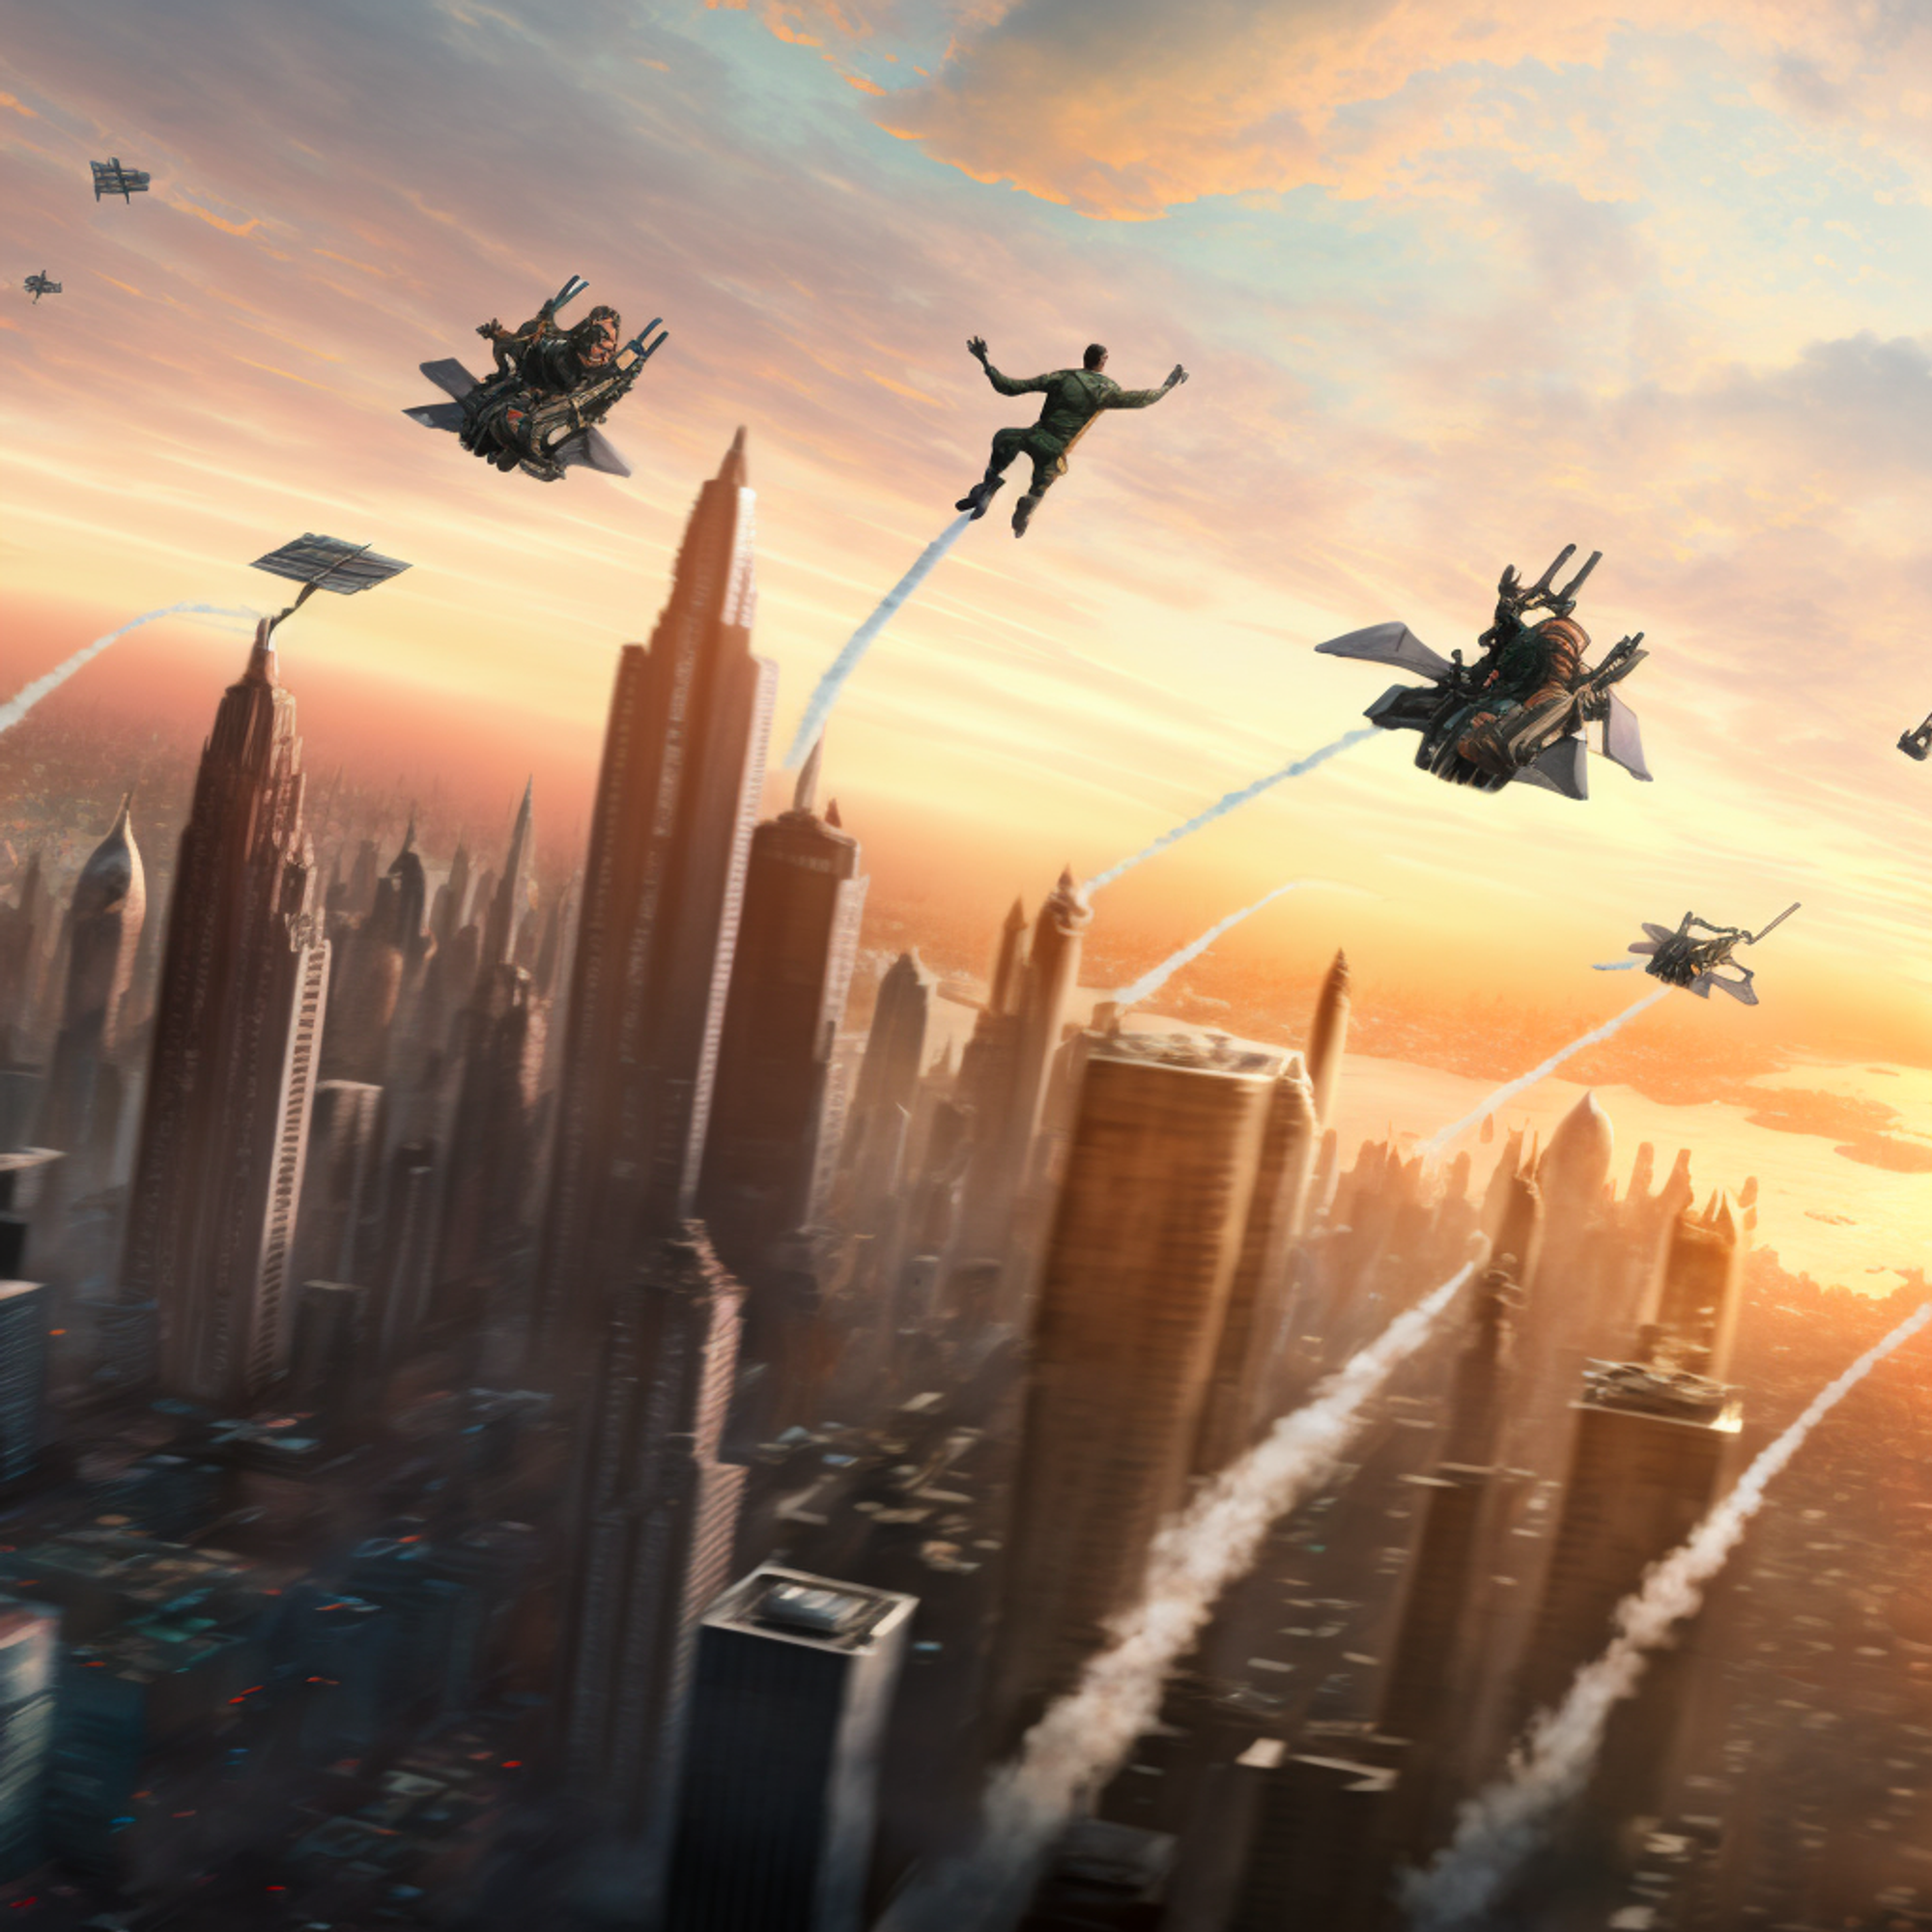 /imagine a highly detailed, cinematic, ultrarealistic picture of several people flying on jetpacks away from a city skyline